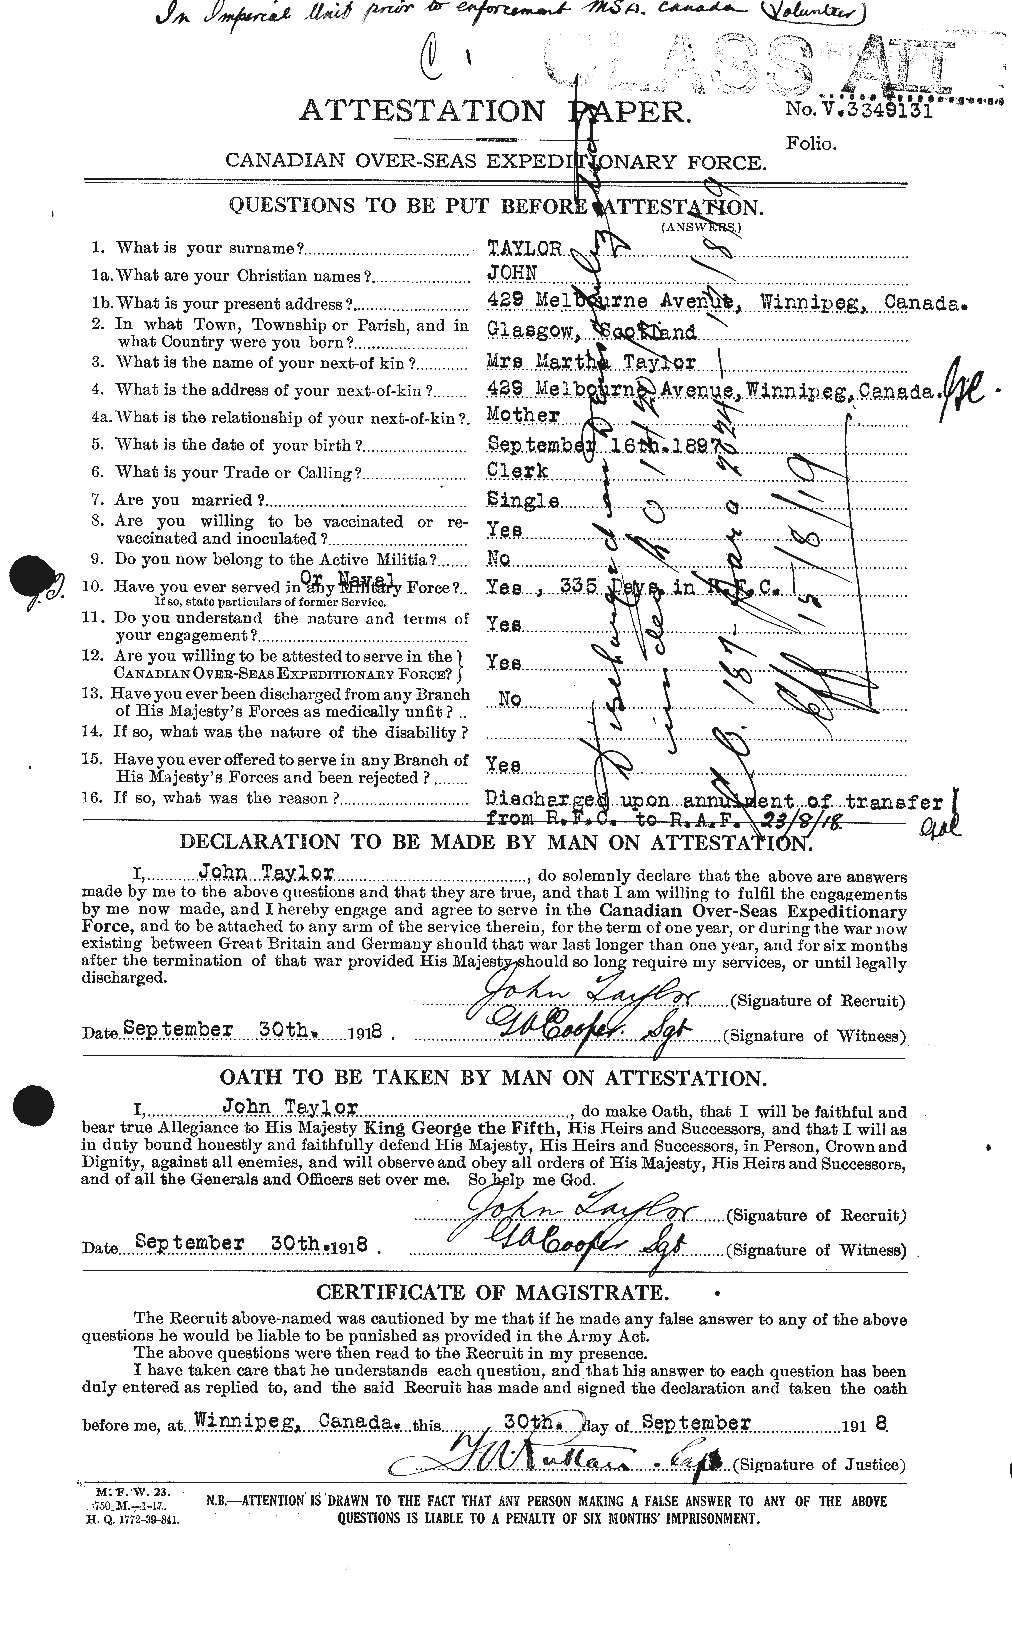 Personnel Records of the First World War - CEF 626993a